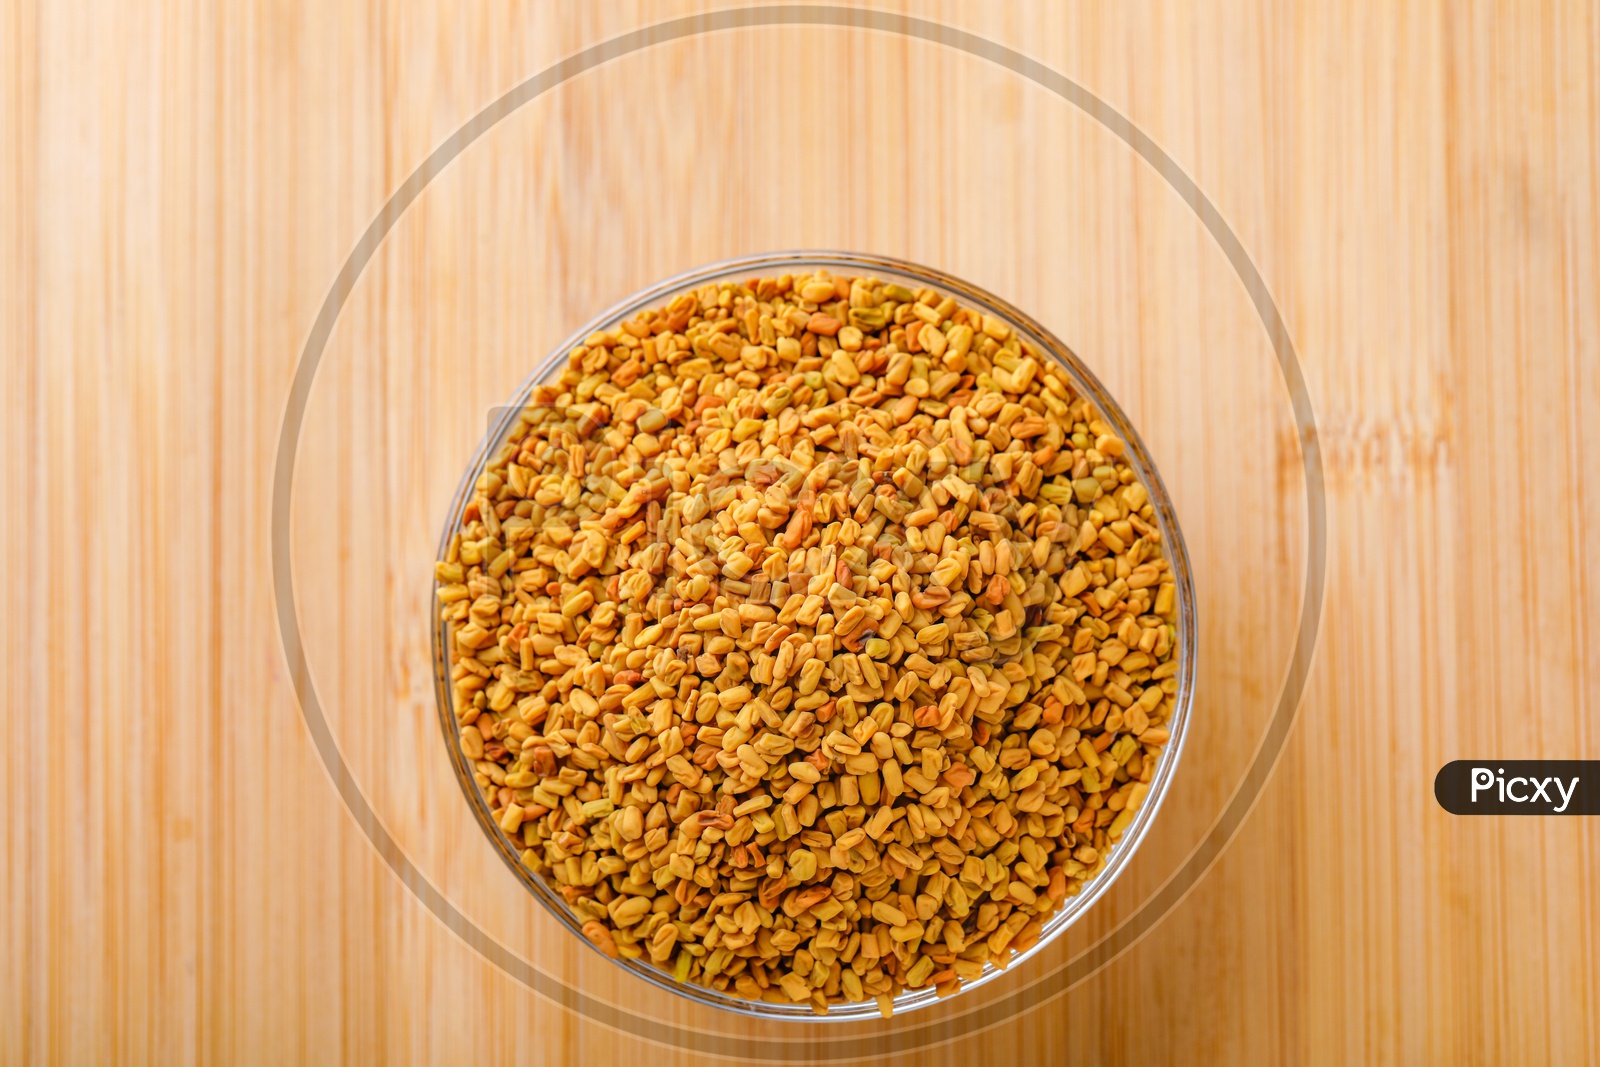 Fenugreek Seeds In a Glass Bowl on an Wooden Table